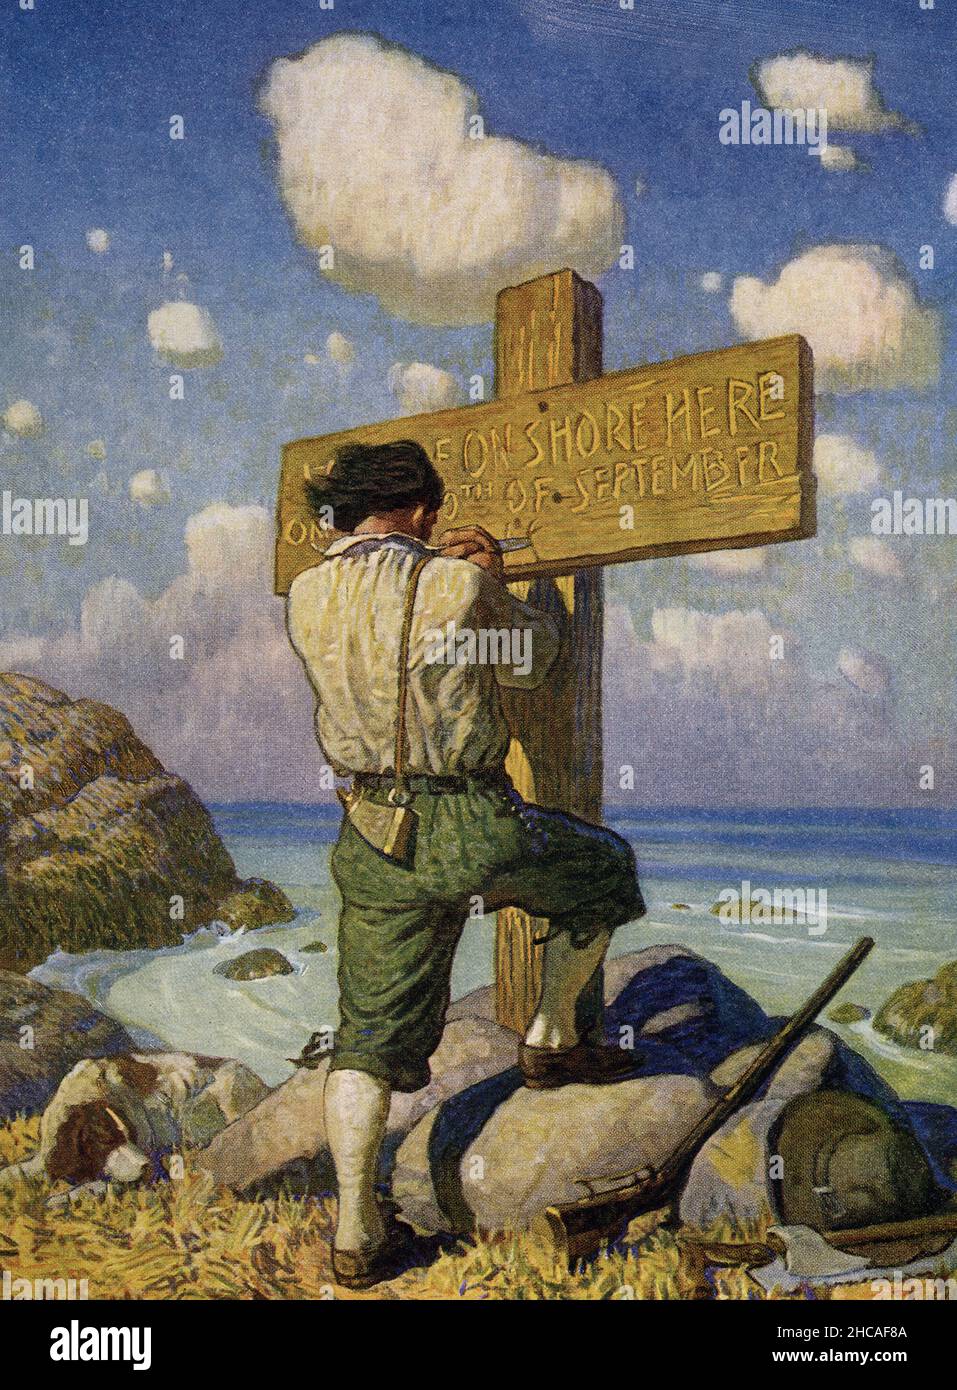 The caption for this image by NC Wyeth that accompanies the tale of Robinson Crusoe by Daniel Defoe reads: 'and making it into a great cross, I set it up on the shore where I first landed.' The captionRobinson Crusoe is a novel written by the English novelist Daniel Defoe and published in 1719. A fictional autobiography,  it tells the tale of an English castaway named  Robinson Crusoe (seen here with his father) who spent 28 years on a remote tropical island near Venezuela before he was rescued.  Newell Convers Wyeth, known as N. C. Wyeth, was an American artist and illustrator. He was the pup Stock Photo